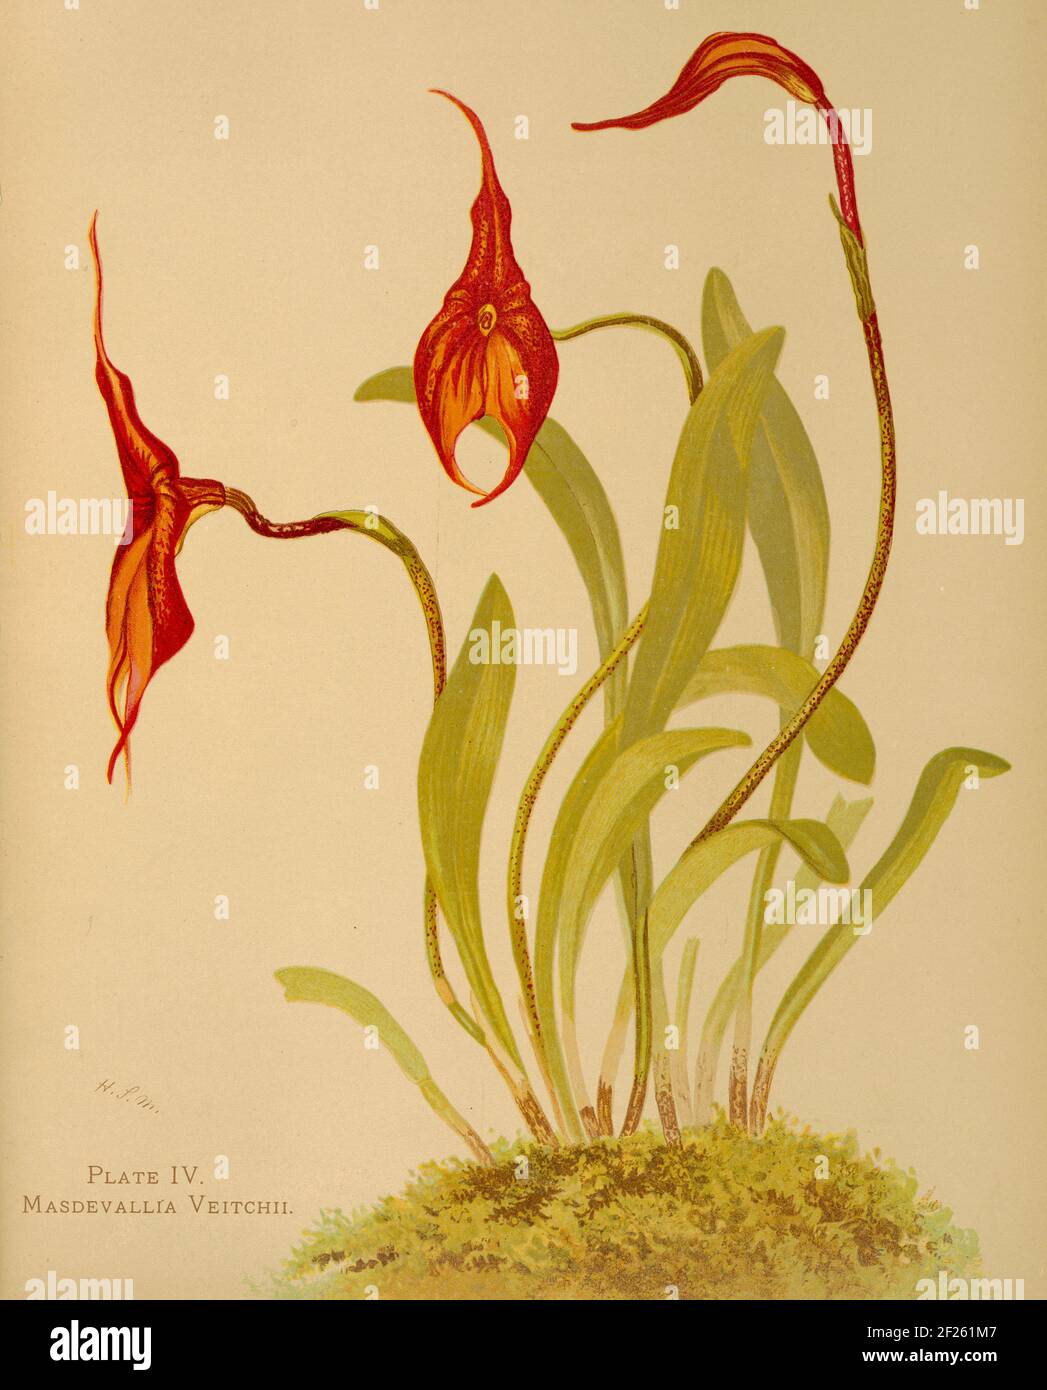 Harriet Stewart Miner's botanical illustration from Orchids - The Royal  Family of Plants from 1885 - Masdevallia veitchii Stock Photo - Alamy